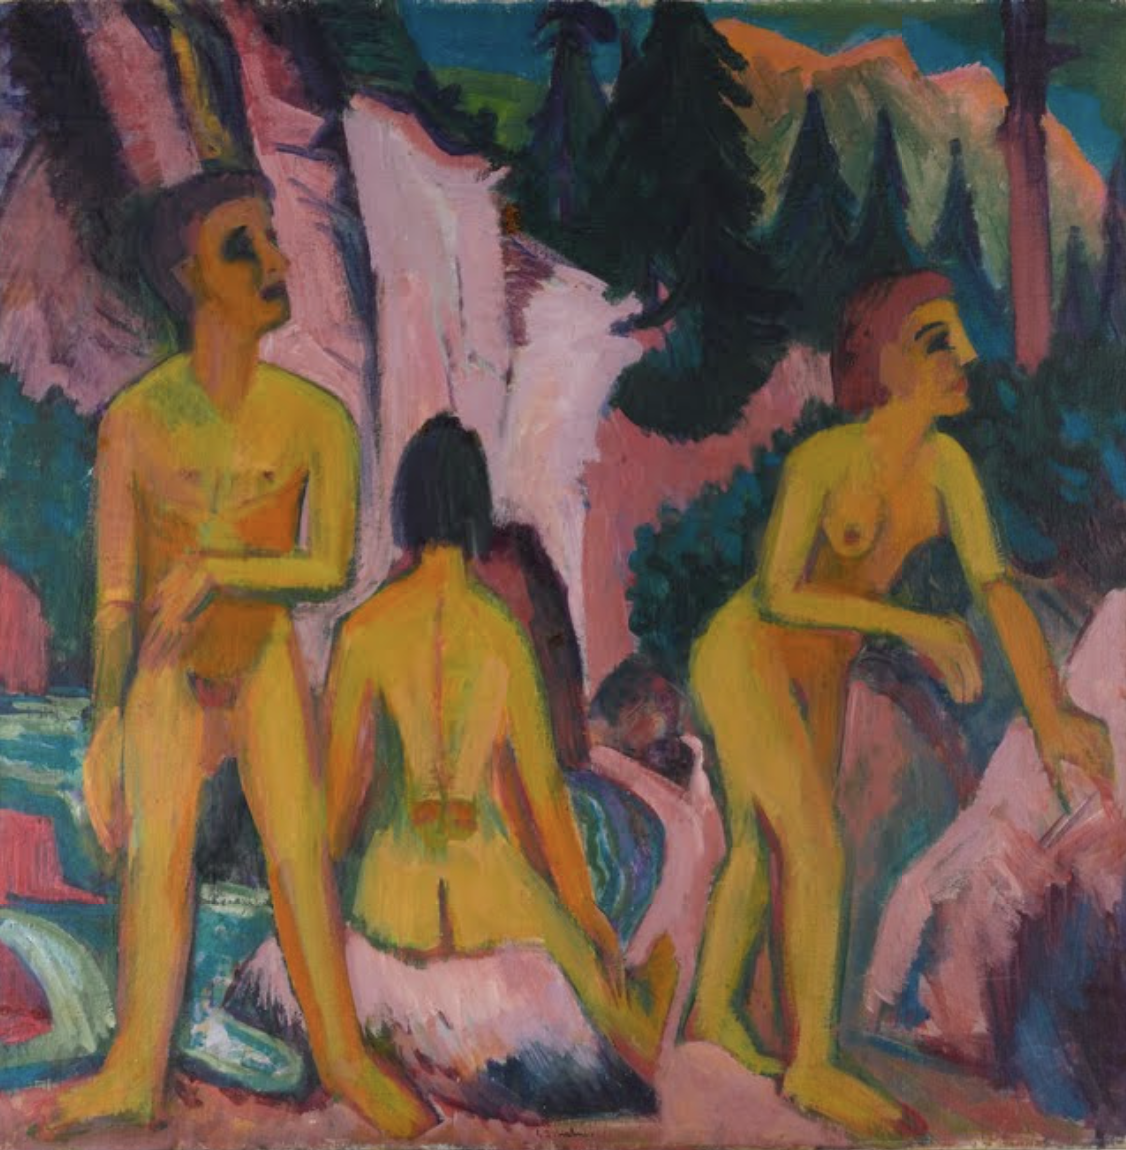 The Wick - Discover Ernst Ludwig Kirchner, Bathers, 1923/27